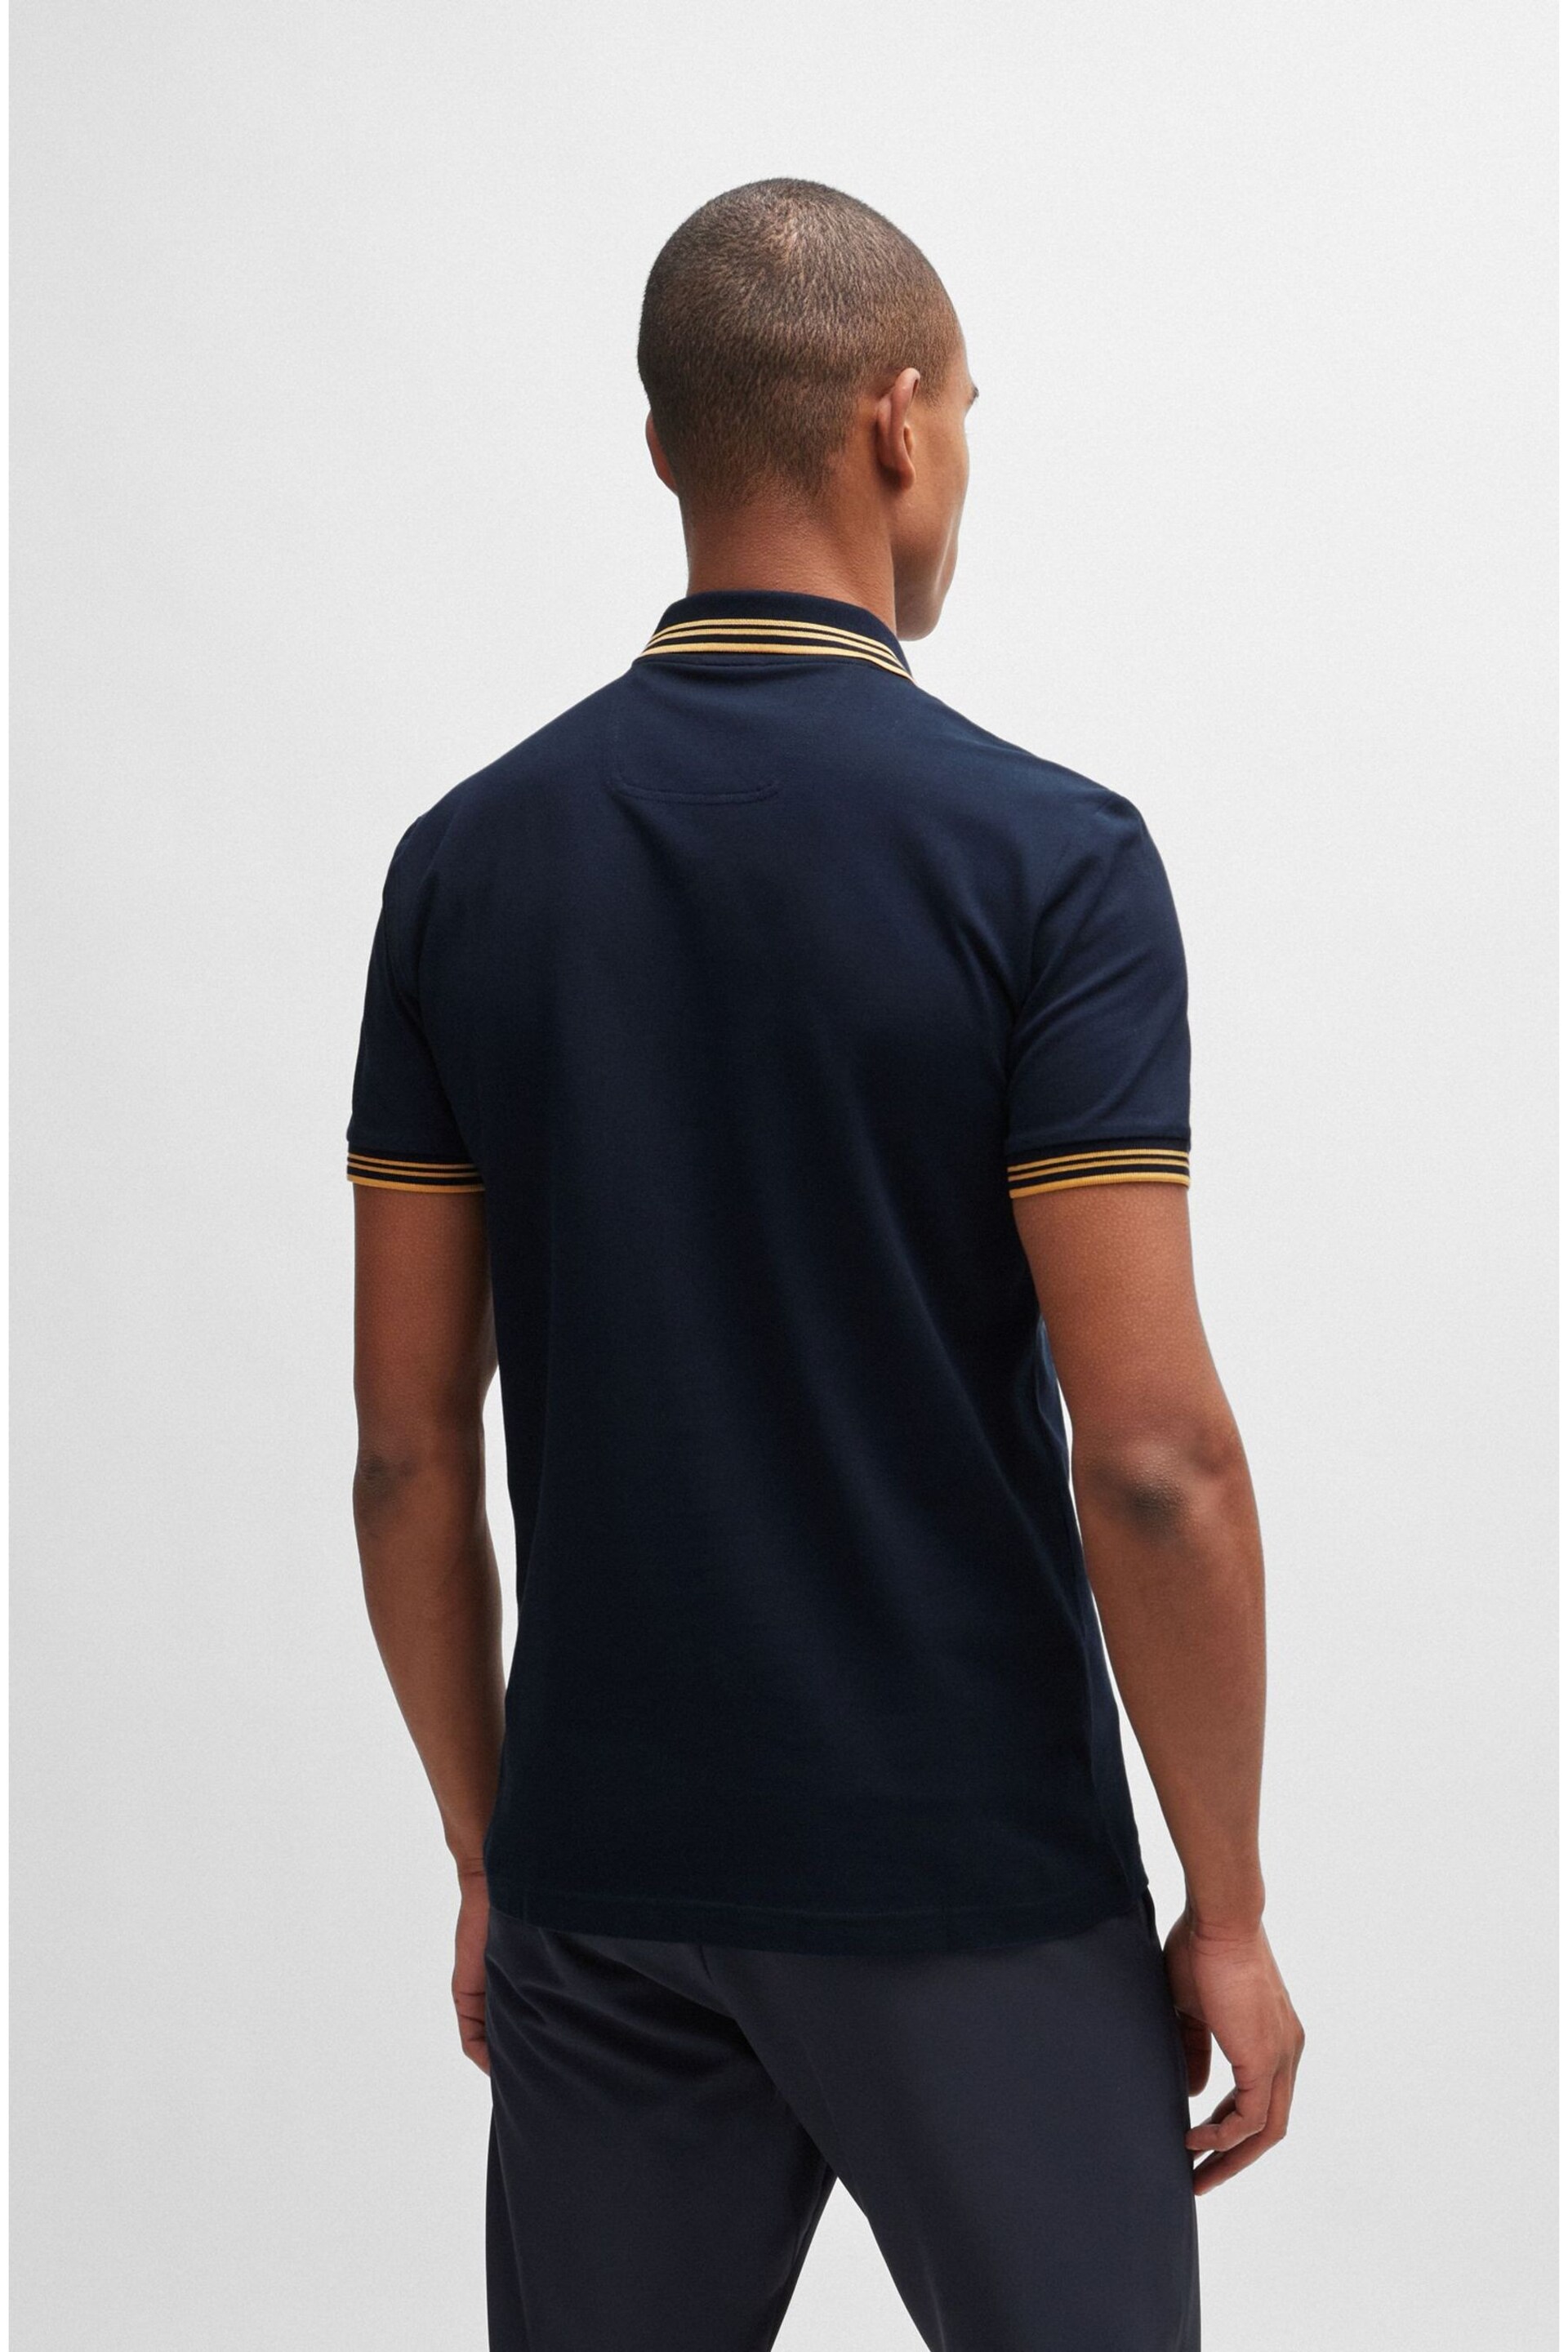 BOSS Dark Blue Tipped Slim Fit Stretch Cotton Polo Shirt - Image 3 of 5